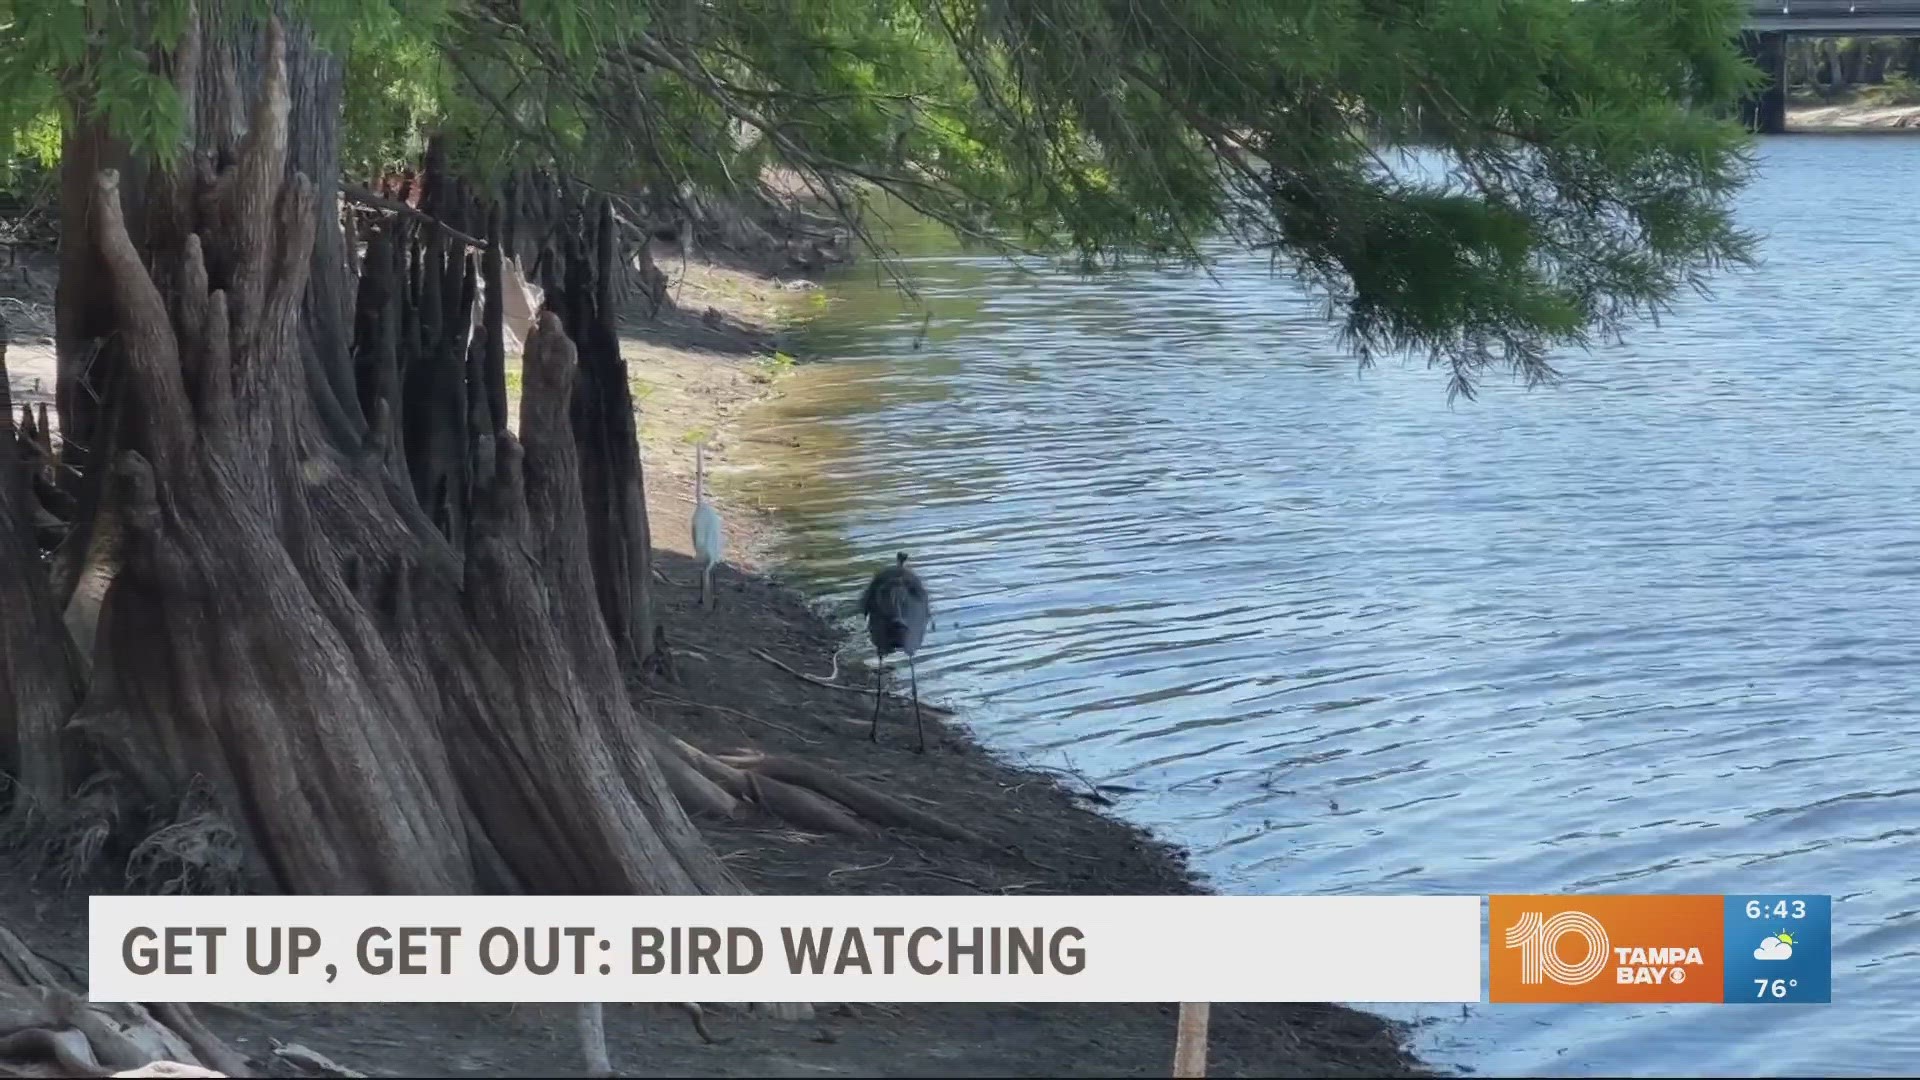 Bird-watching is a great way to get out in the community and experience nature.